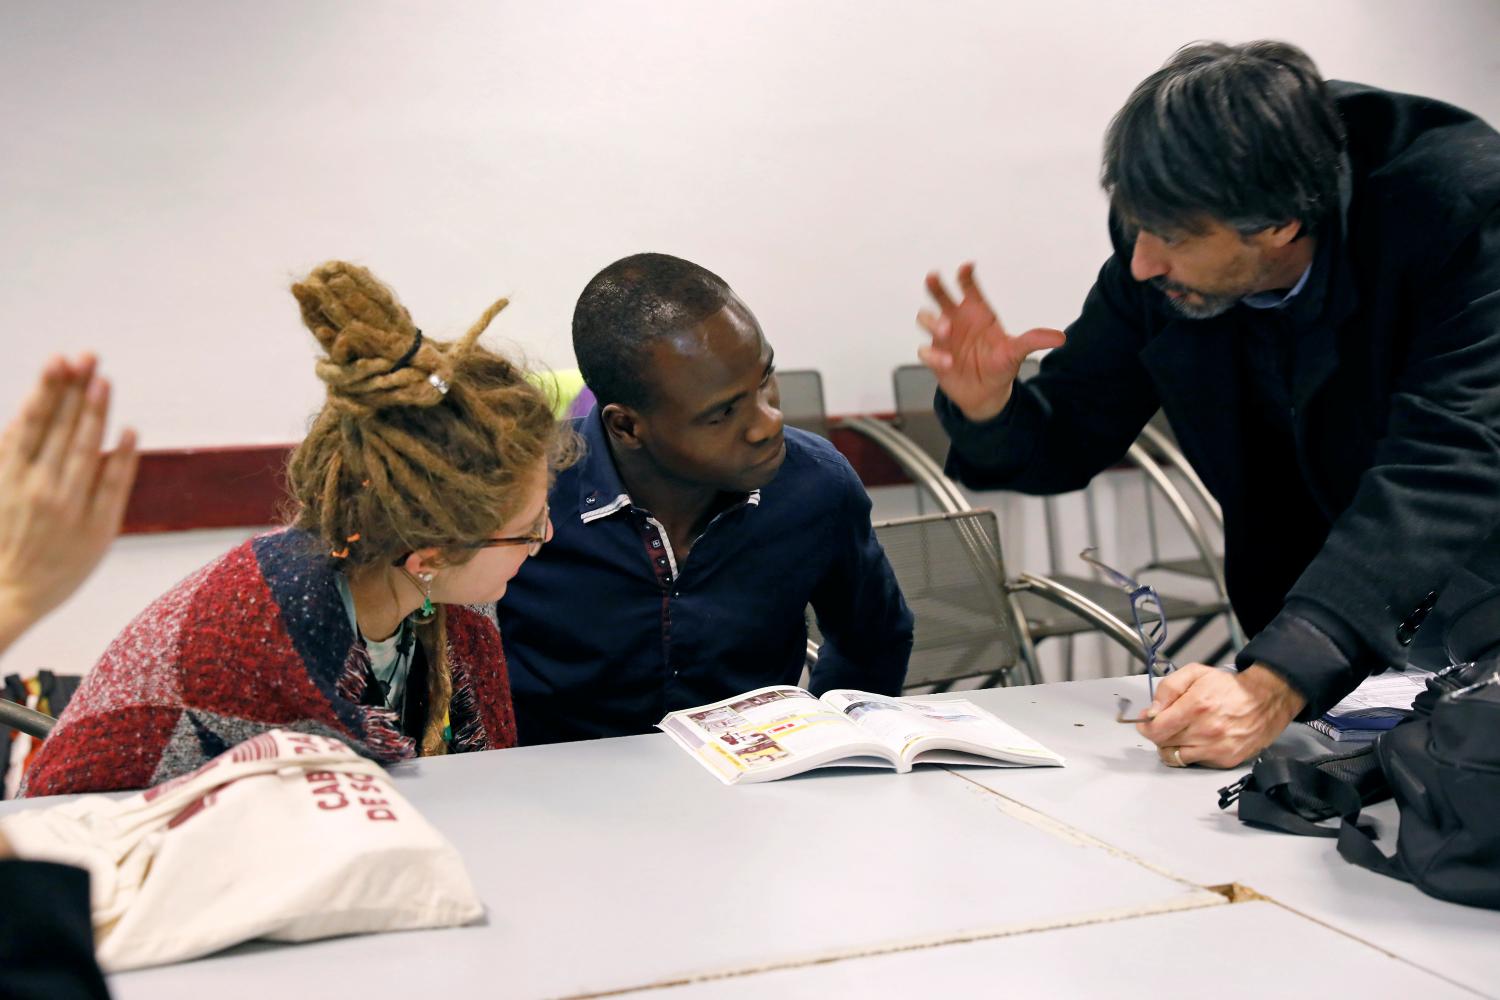 A migrant converses with a teacher during Italian language classes near the former Olympic village in Turin